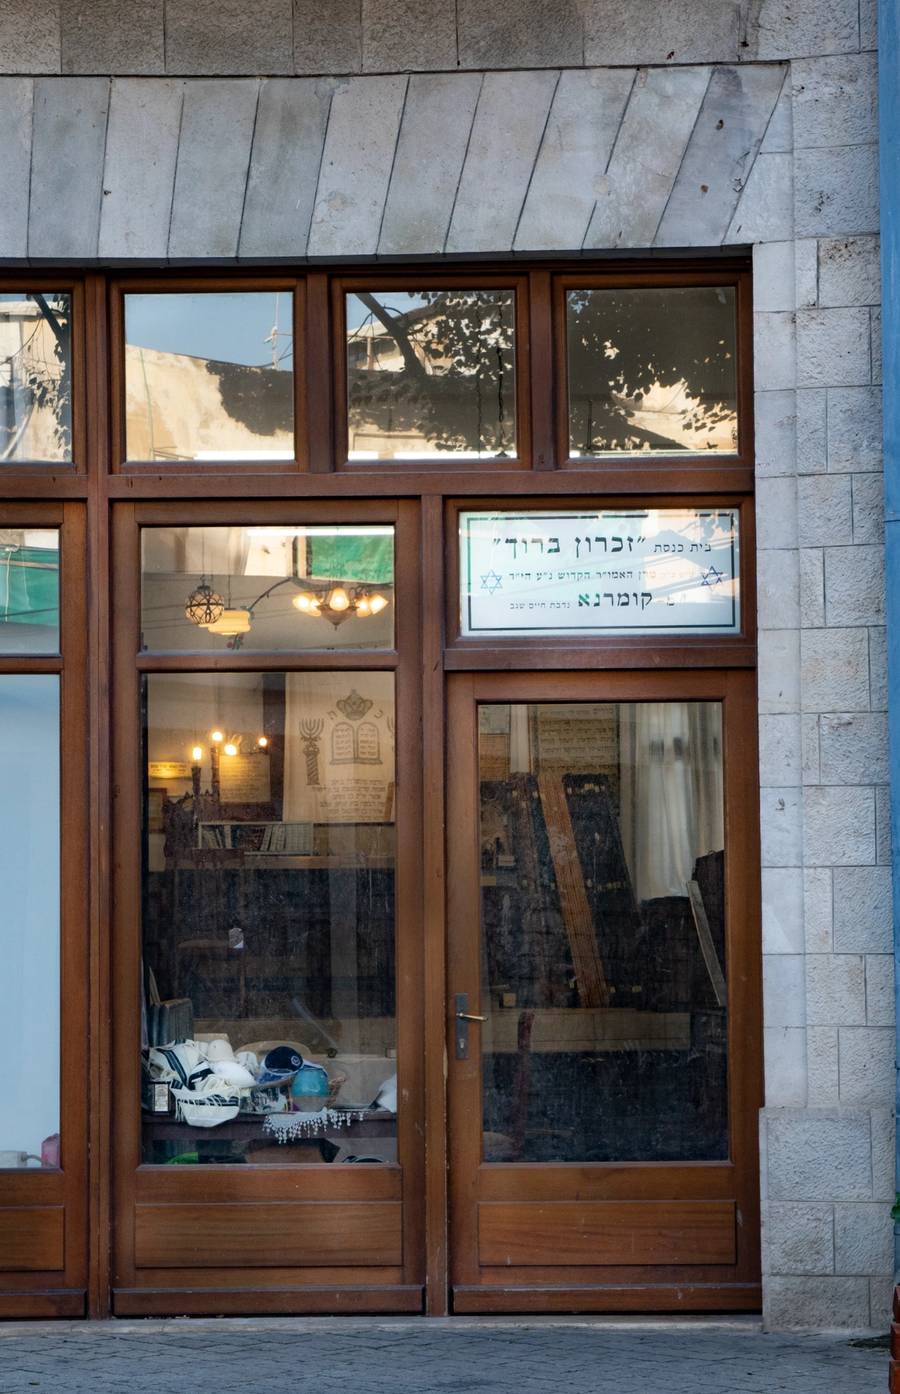 The entrance of the Zichron Baruch synagogue